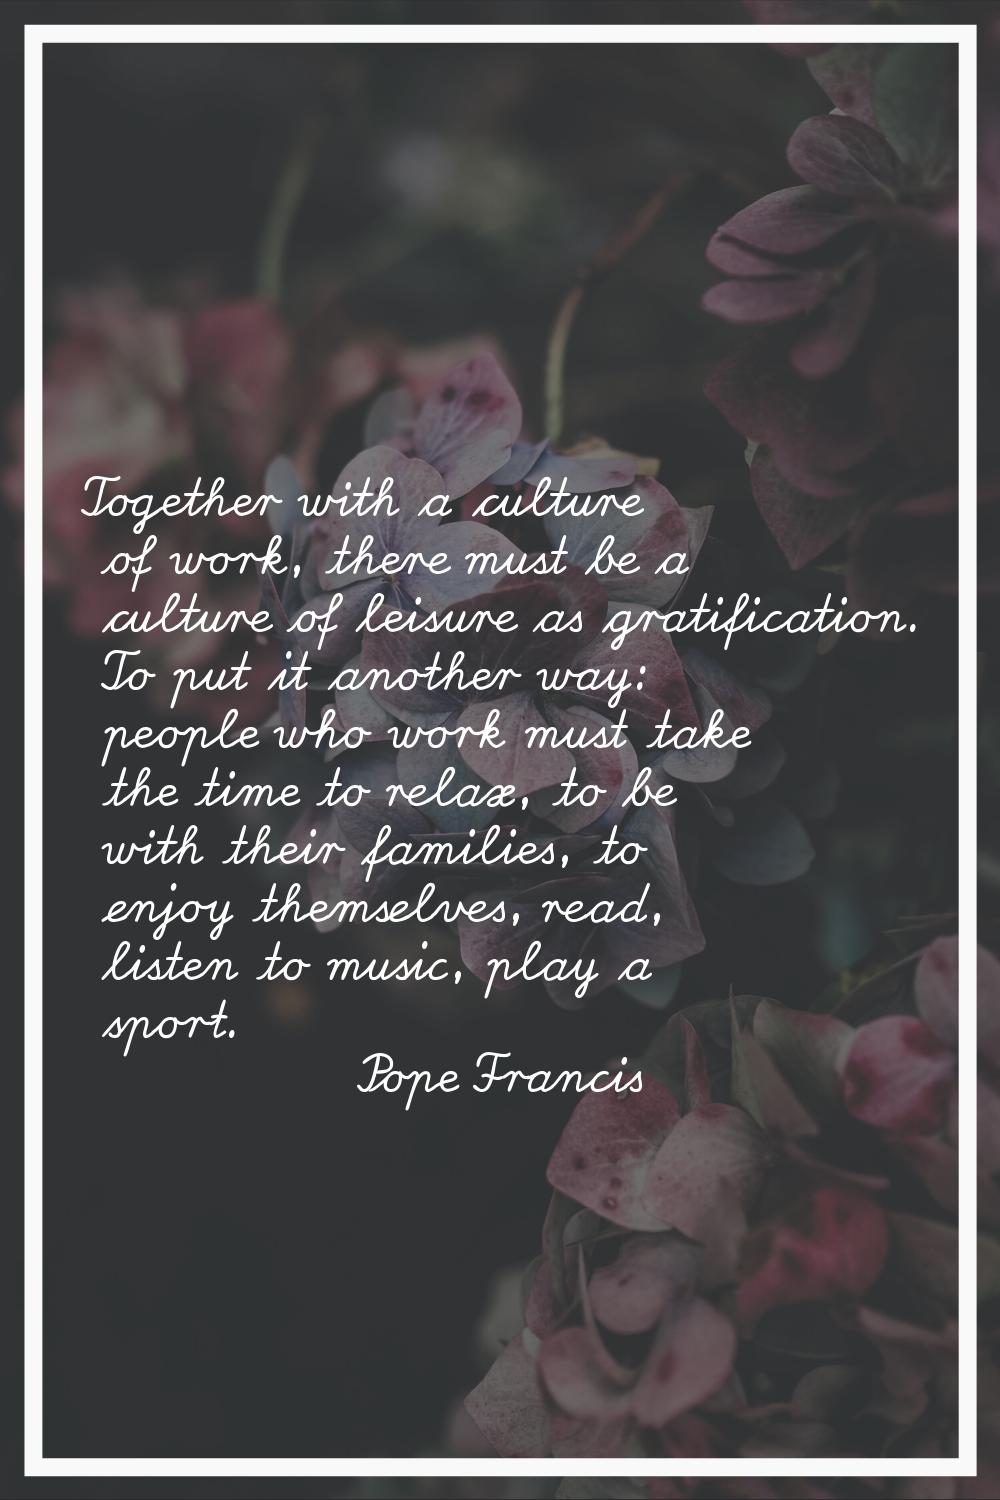 Together with a culture of work, there must be a culture of leisure as gratification. To put it ano